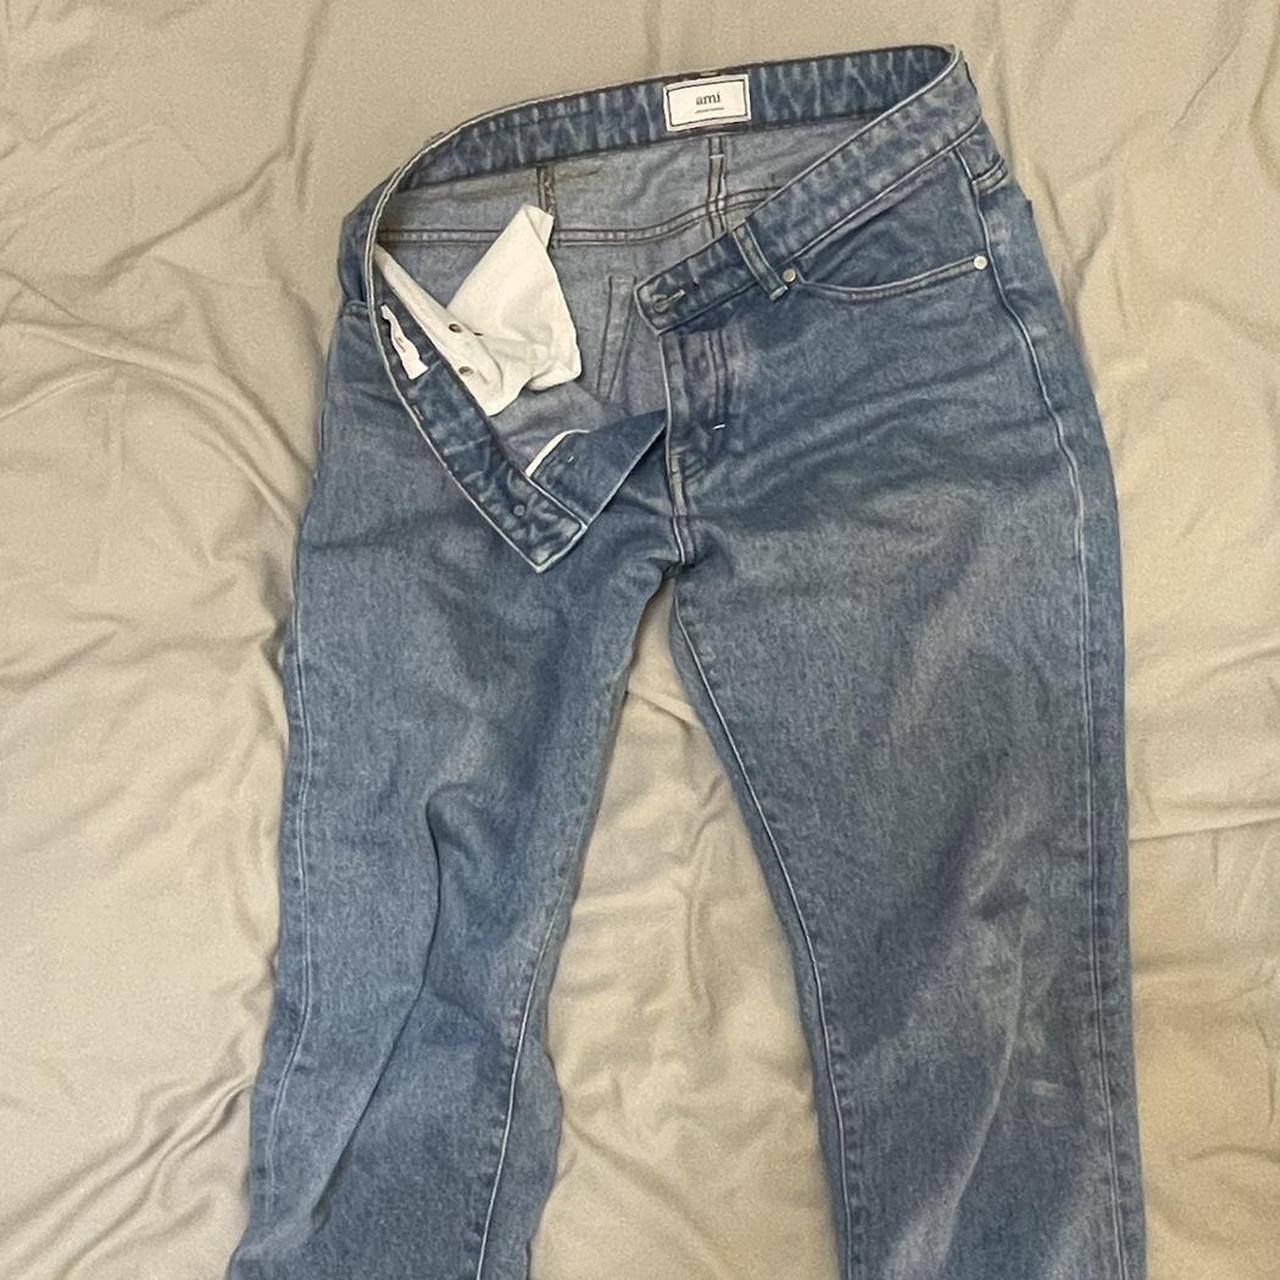 AMI jeans in great condition. Little bit of wear and... - Depop